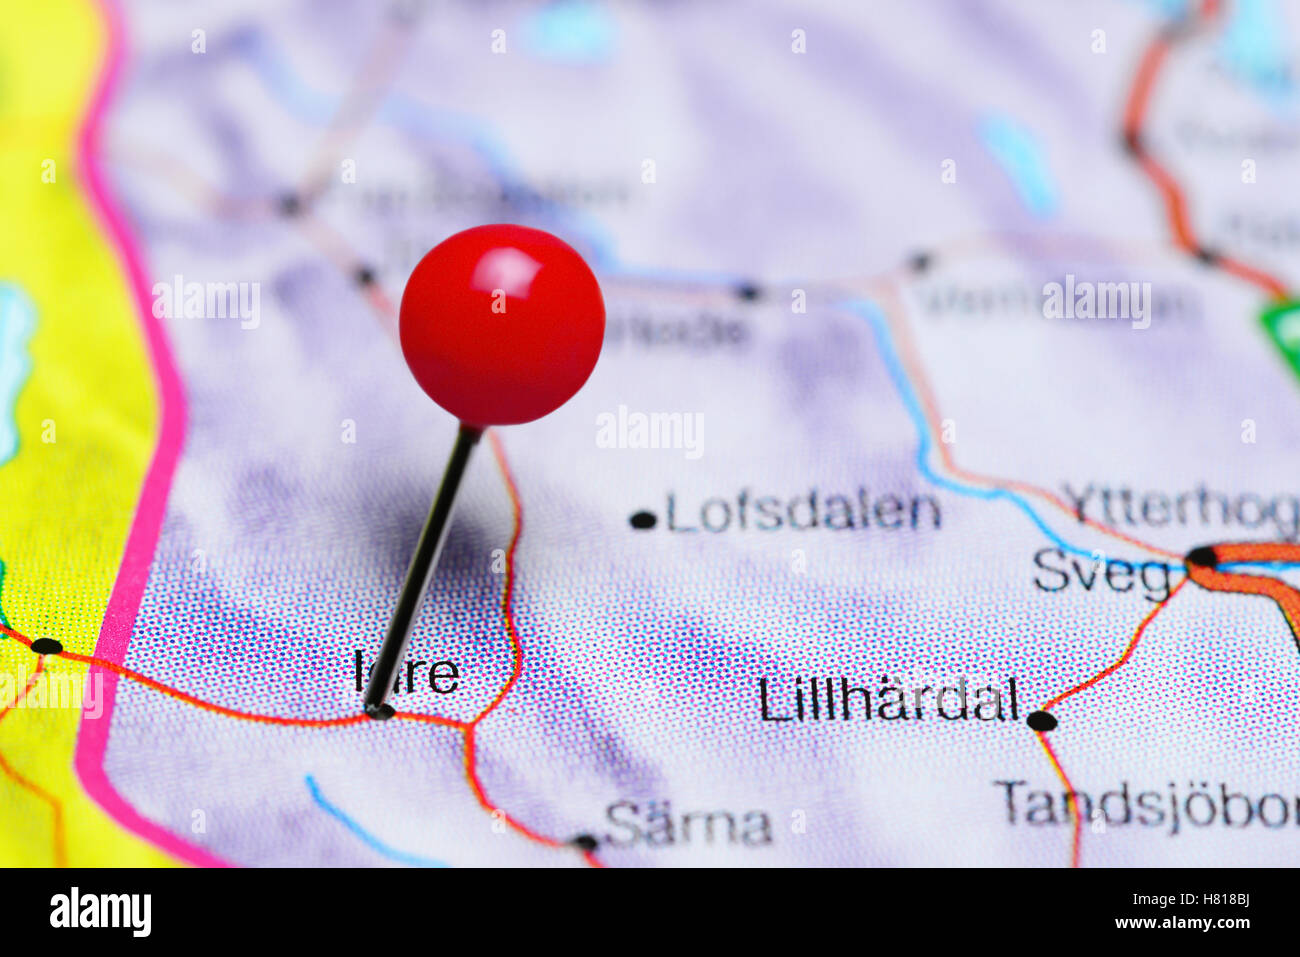 Idre pinned on a map of Sweden Stock Photo